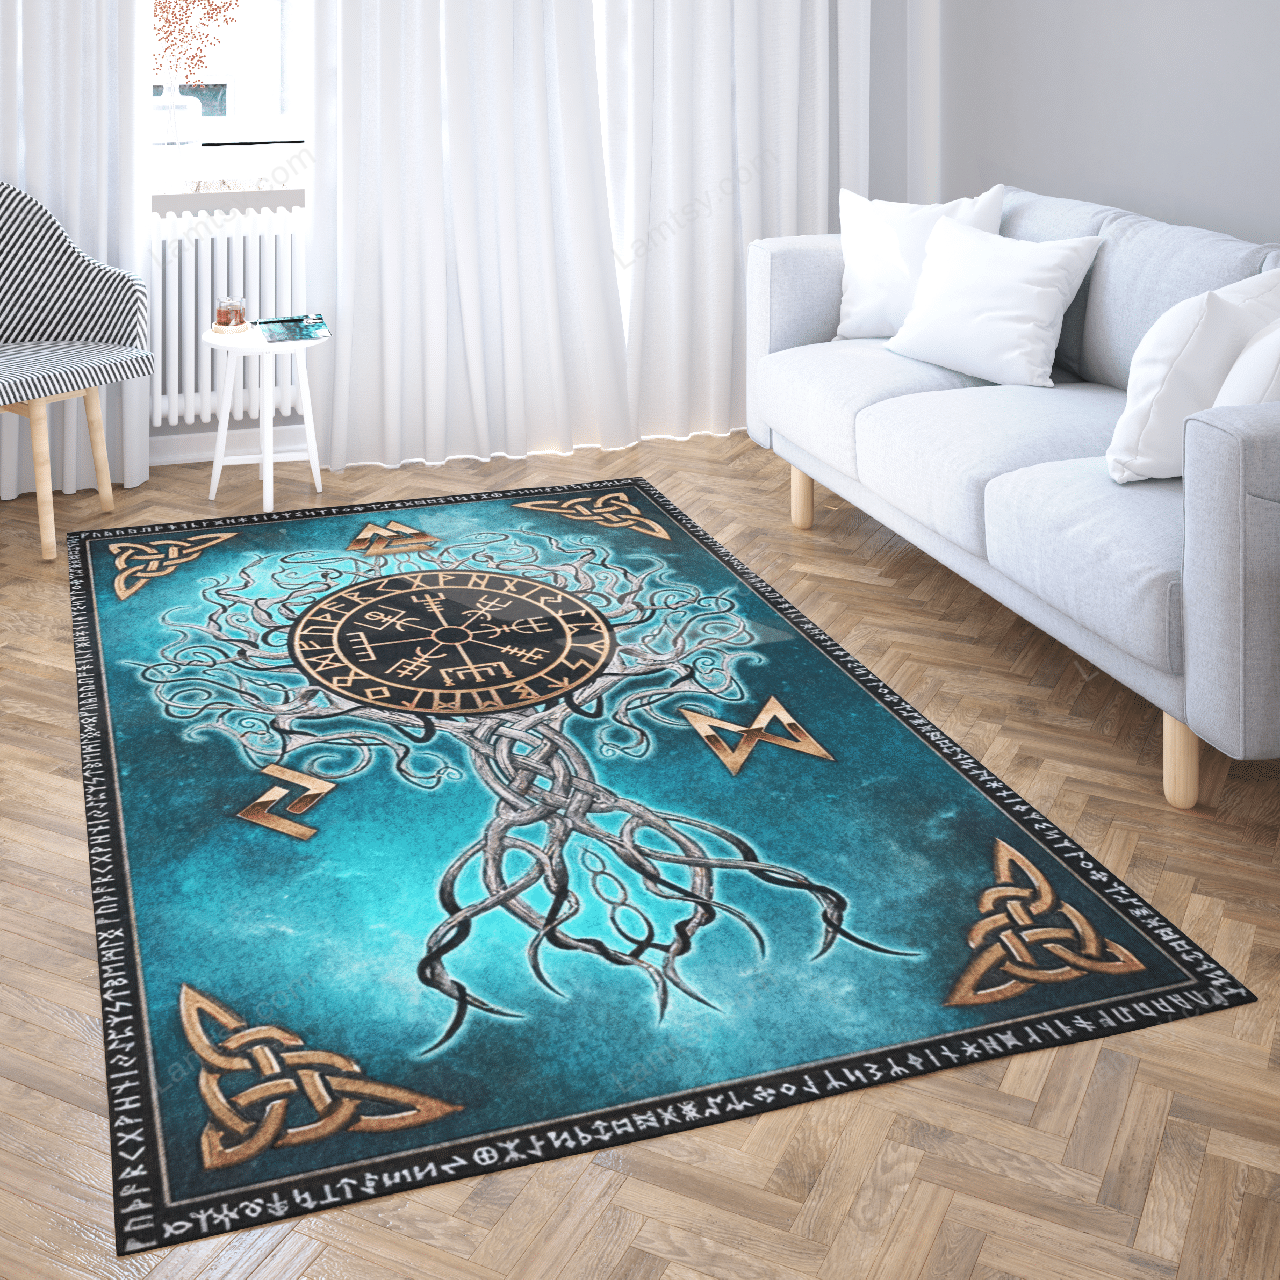 Wicca Tree of Life Viking rug – LIMITED EDITION